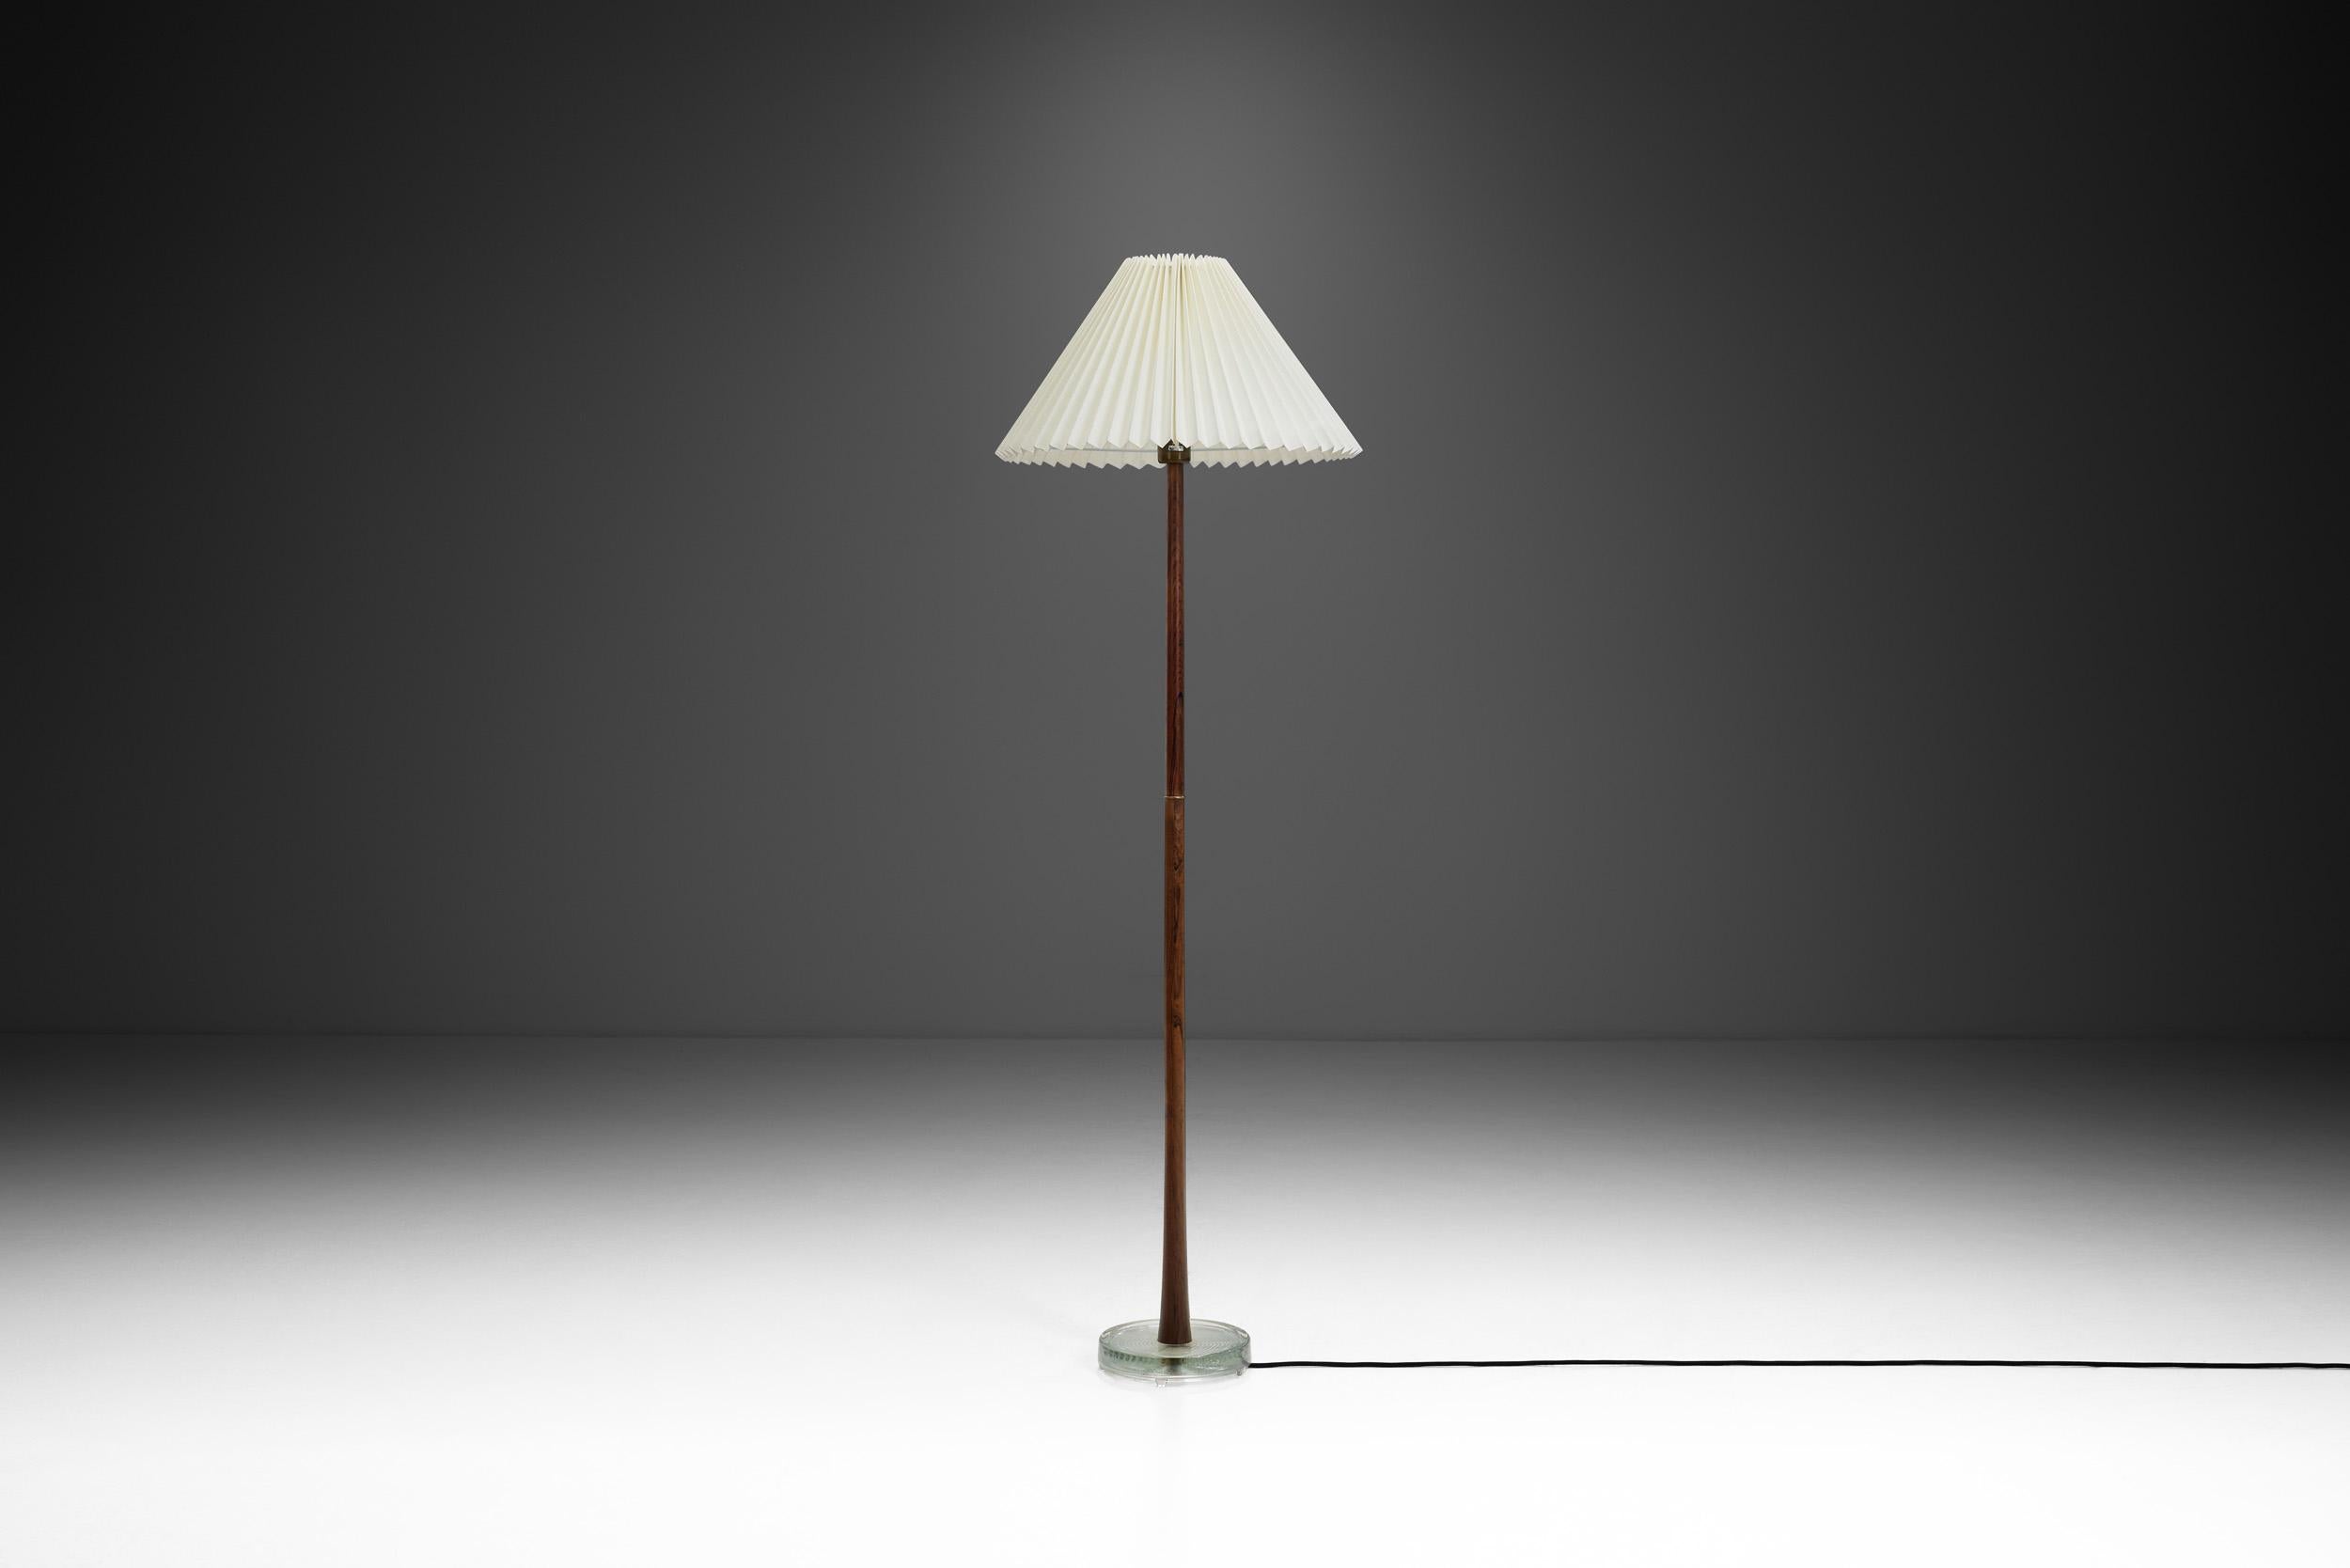 Mid-Century Modern Floor Lamp with Ruched Shade, Scandinavia ca 1950s For Sale